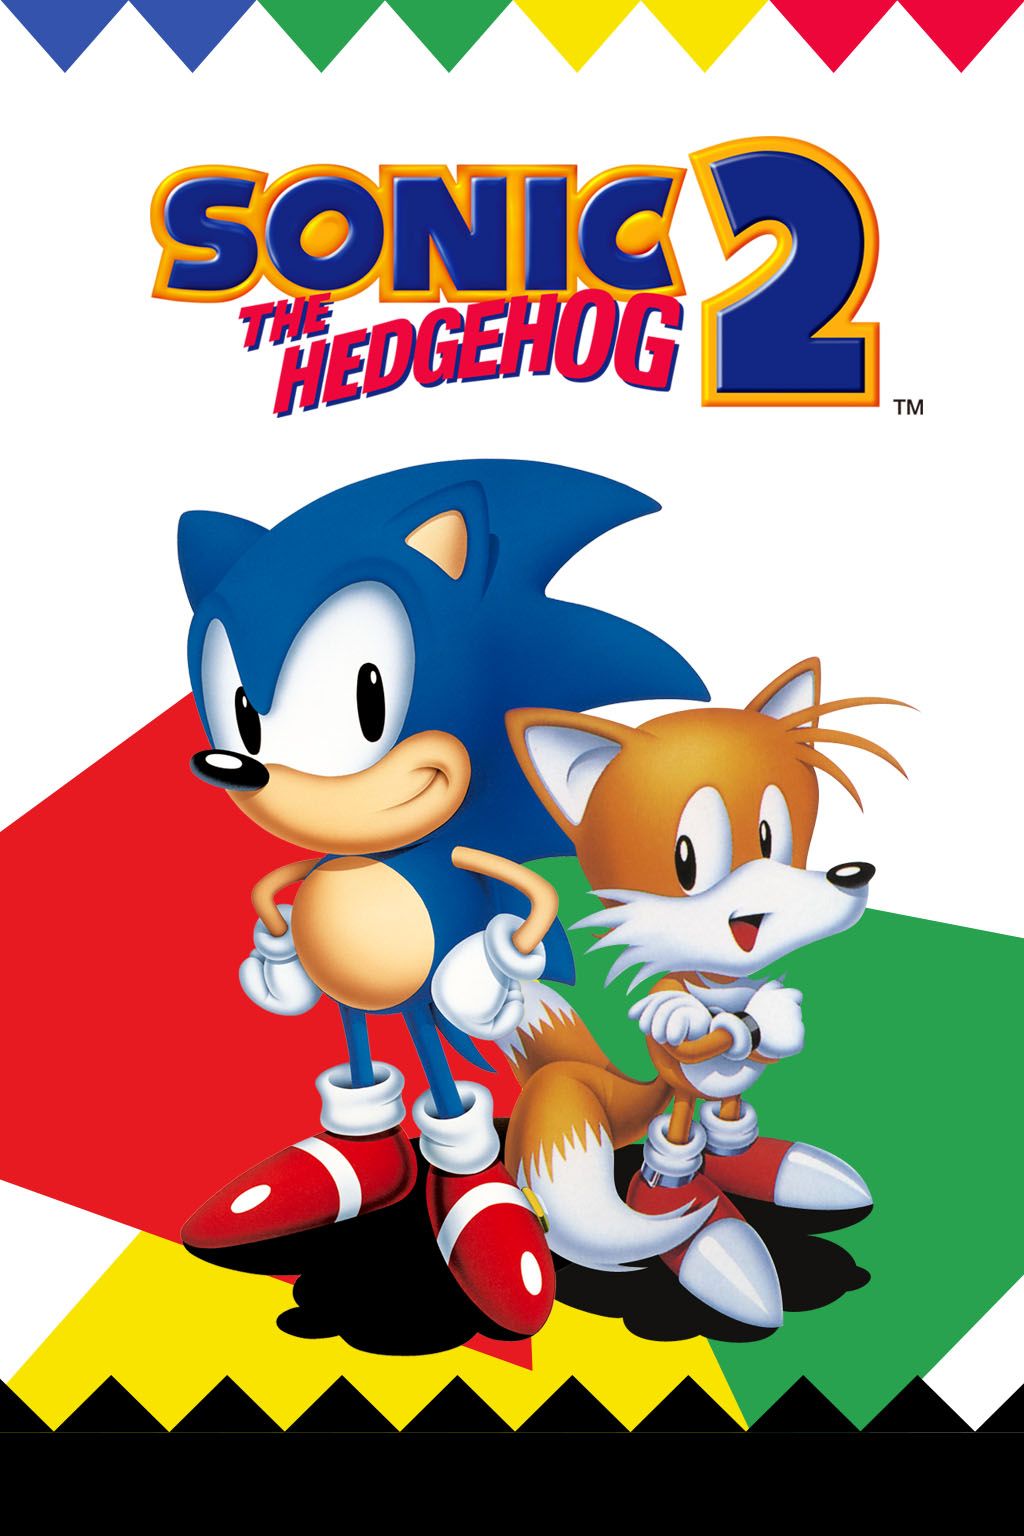 3d sonic the hedgehog 3ds